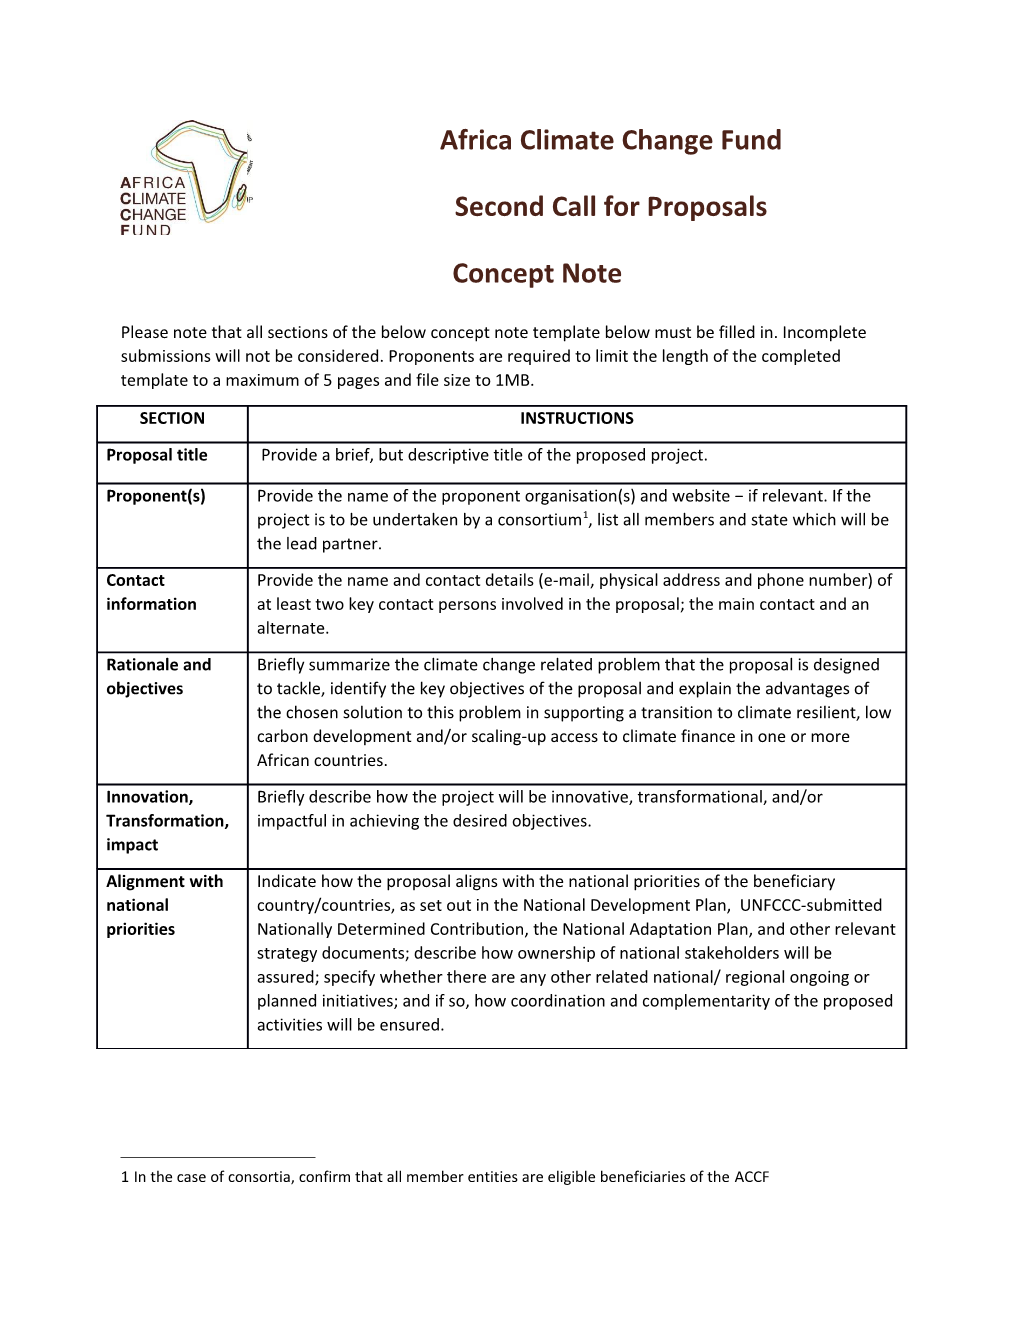 Second Call for Proposals